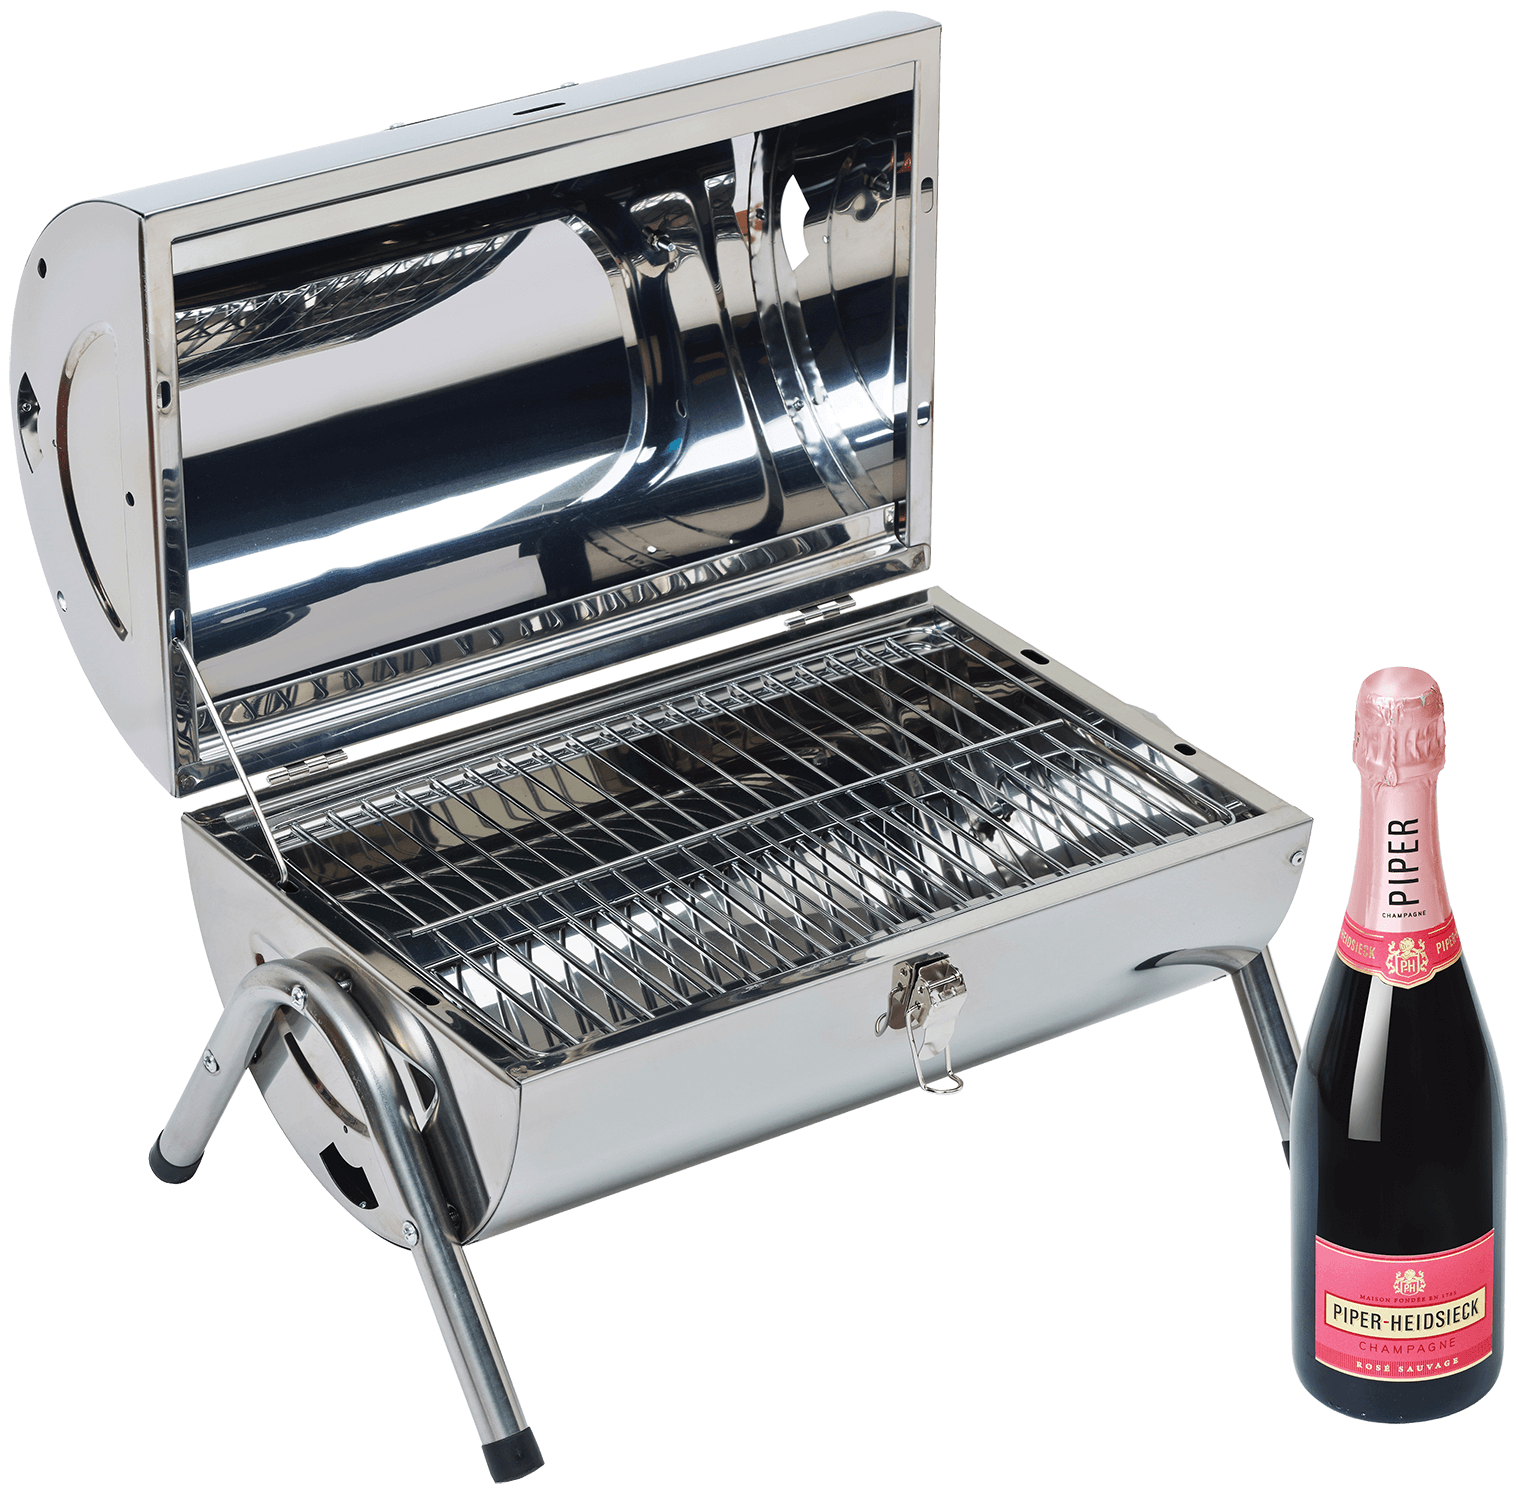 Piper-Heidsieck Sauvage Rose Brut Champagne AOC (gift box BBQ) piper heidsieck year of the tiger brut champagne aoc gift box